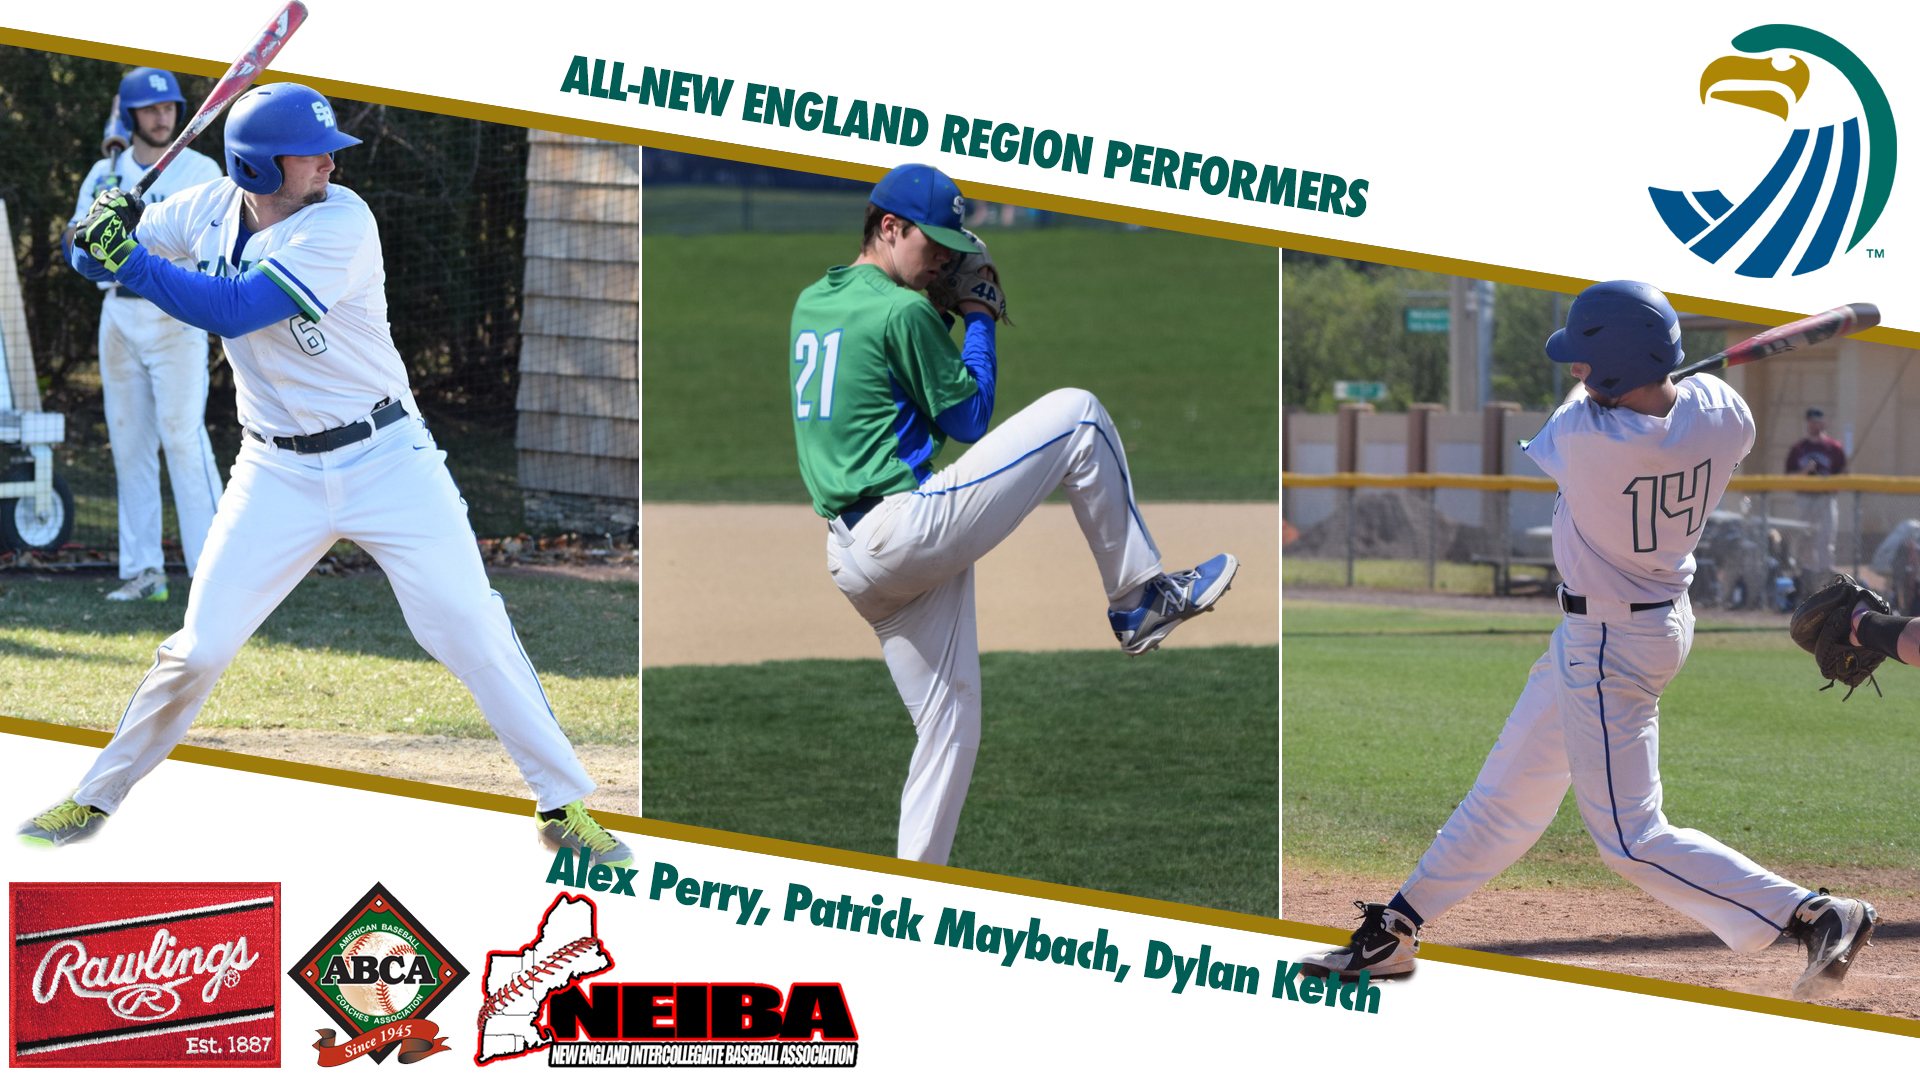 Alex Perry, Patrick Maybach, and Dylan Ketch have been named to the Rawlings All-New England Region Team